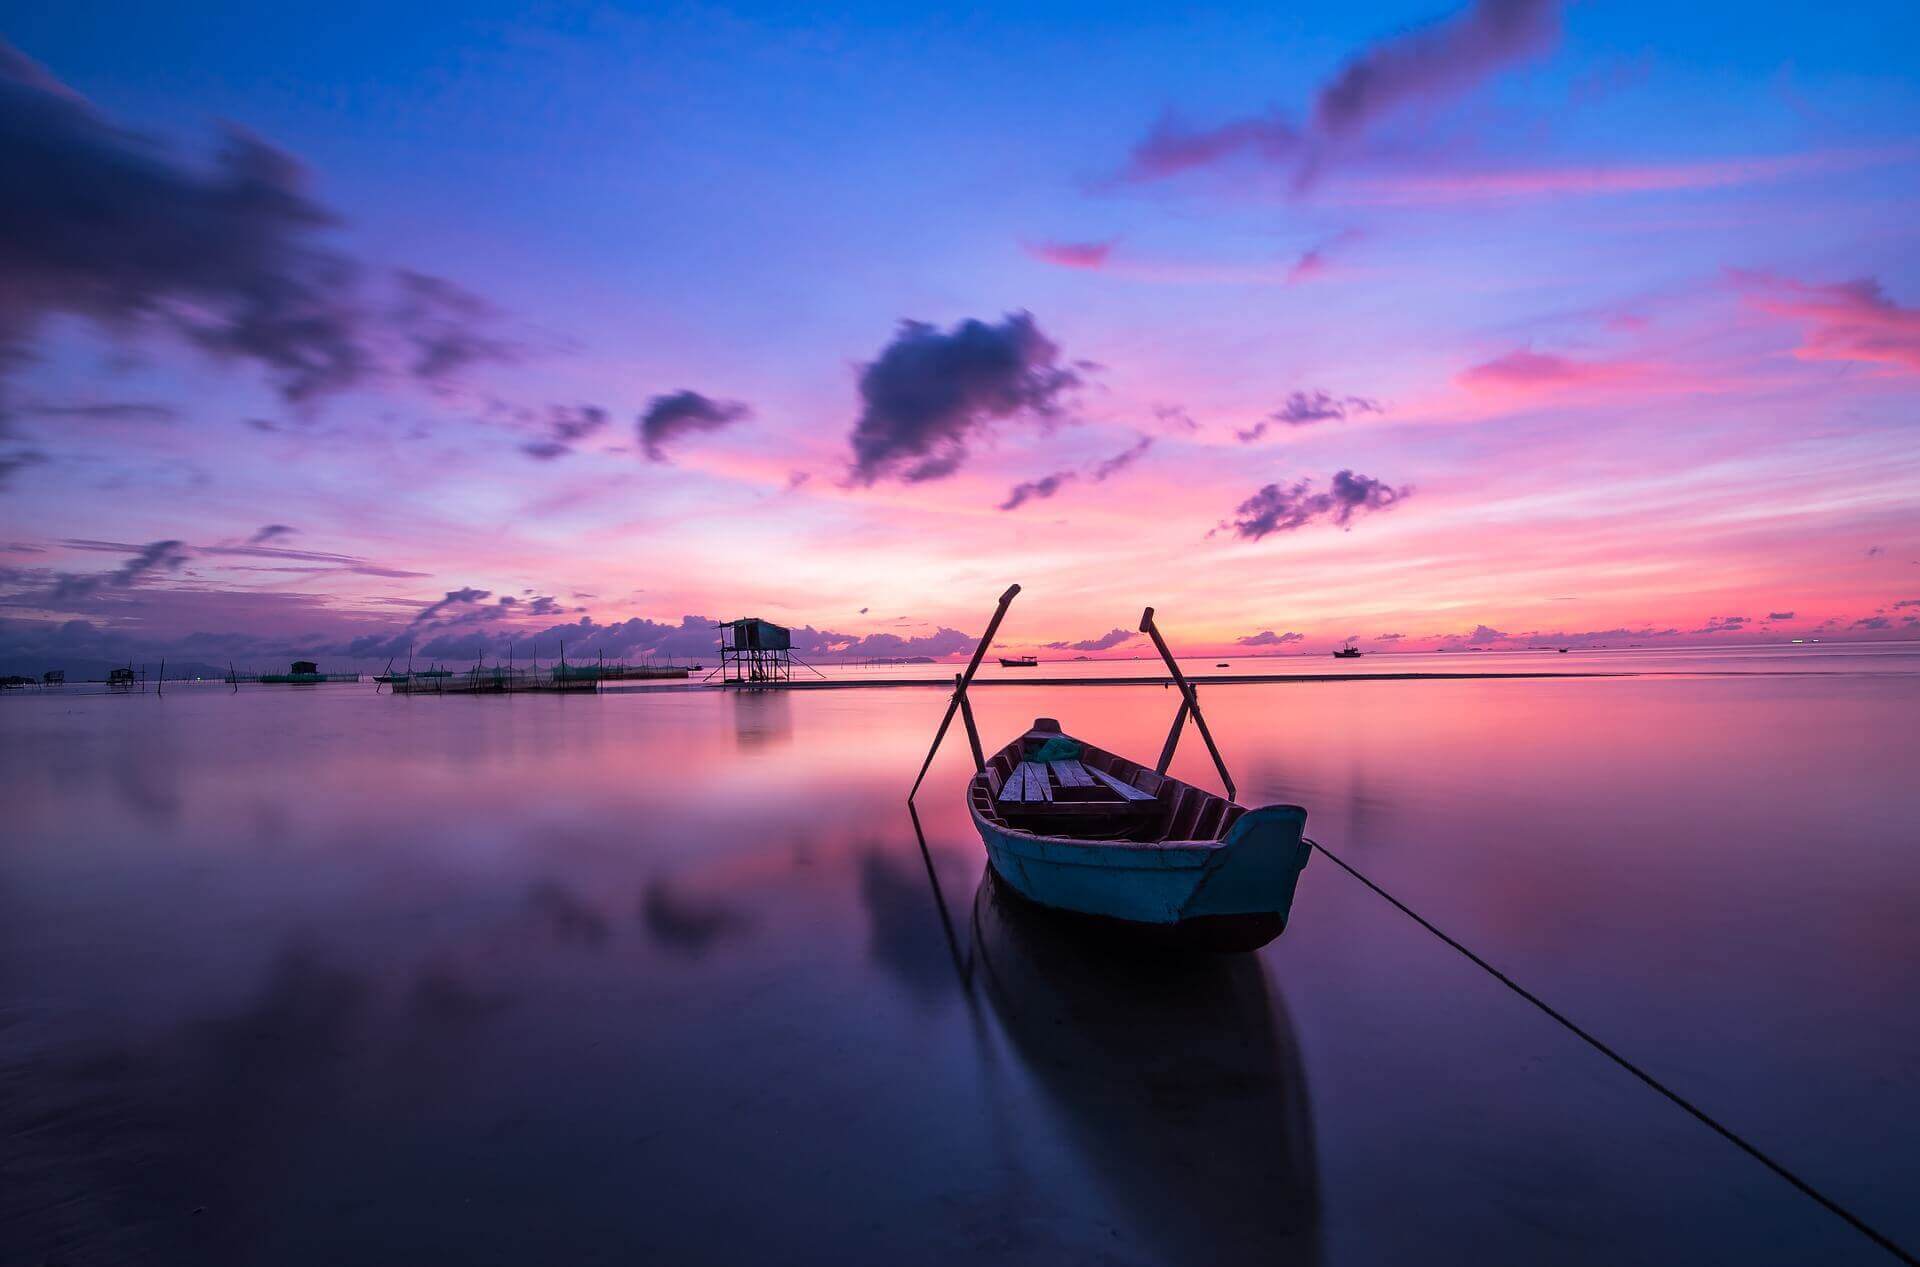 A boat on the calm see with a beautiful background of pink and blue colors.